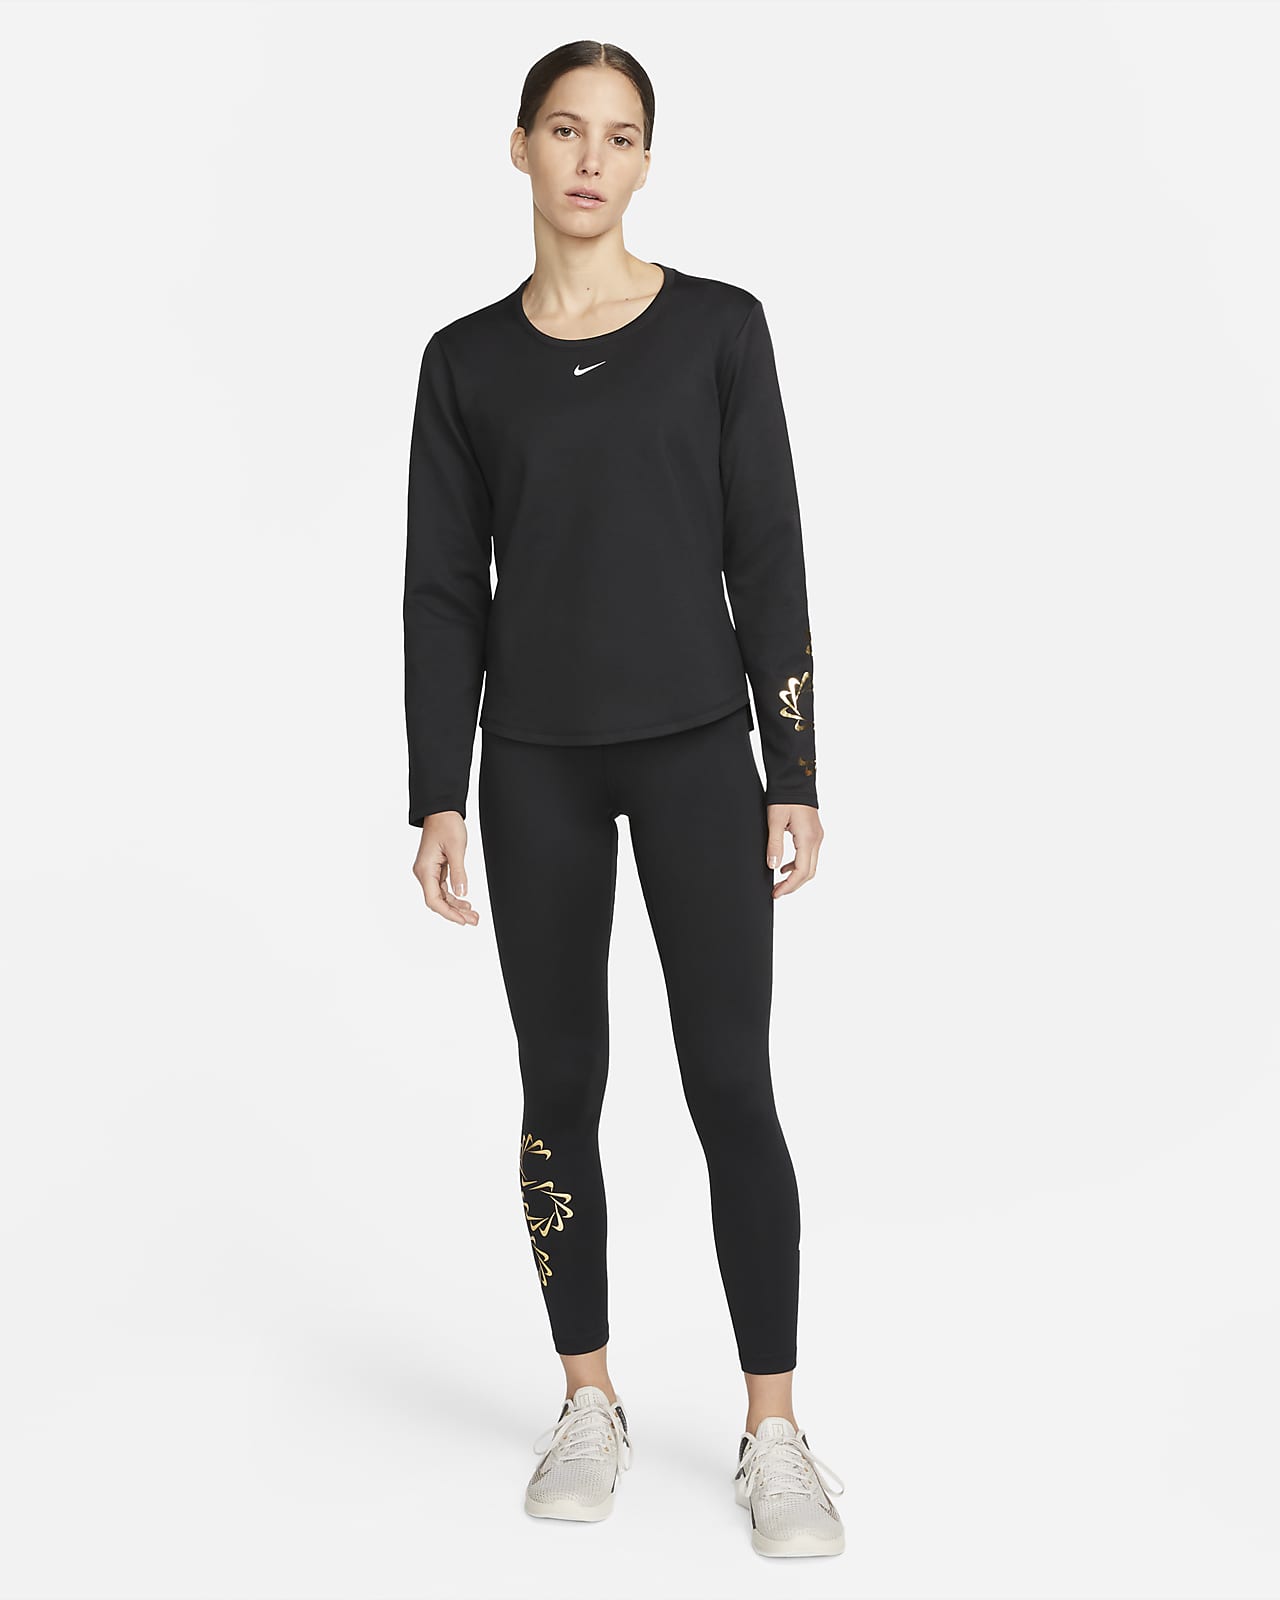 Nike Therma-FIT One Women's Graphic Long-Sleeve Top. Nike GB